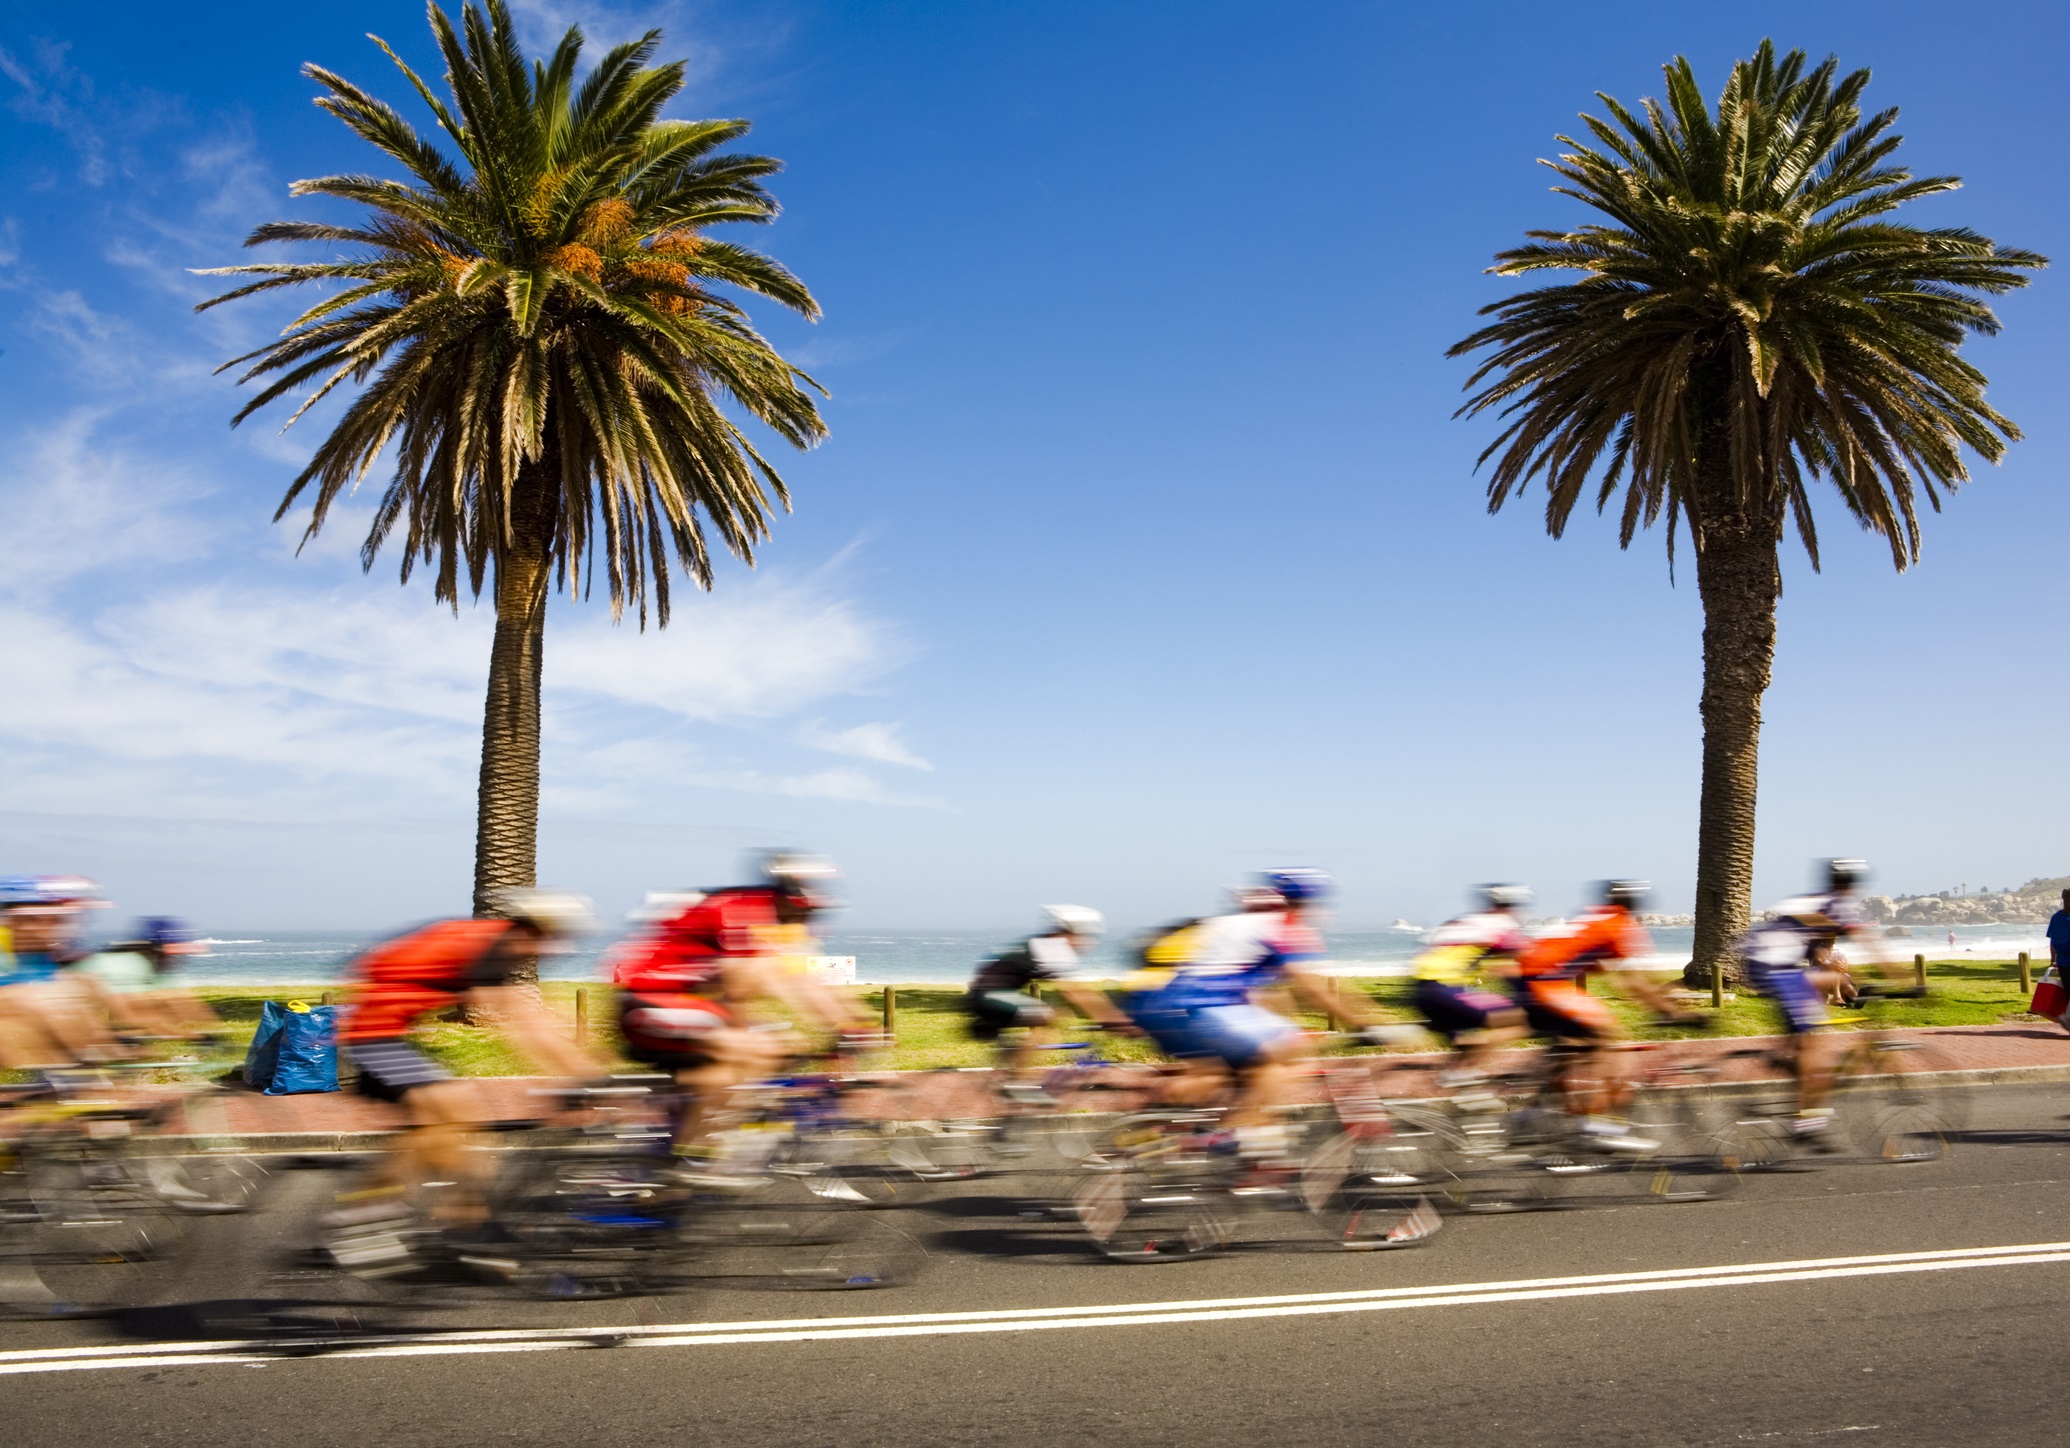 Experience the Cape Town Cycle Tour